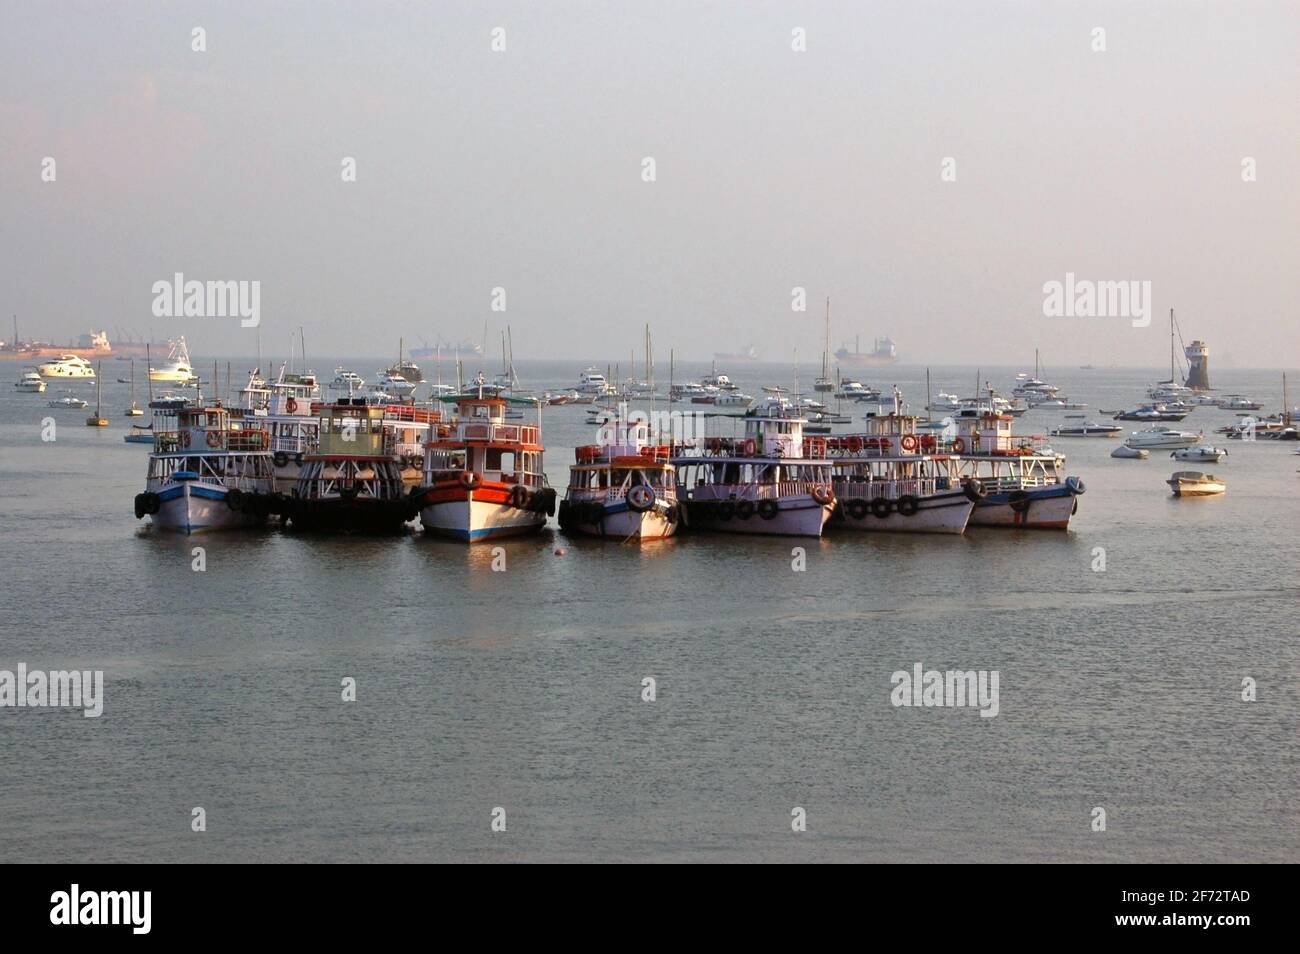 A group of passenger boats moored in the harbour in the Colaba district of Mumbai, India. Stock Photo